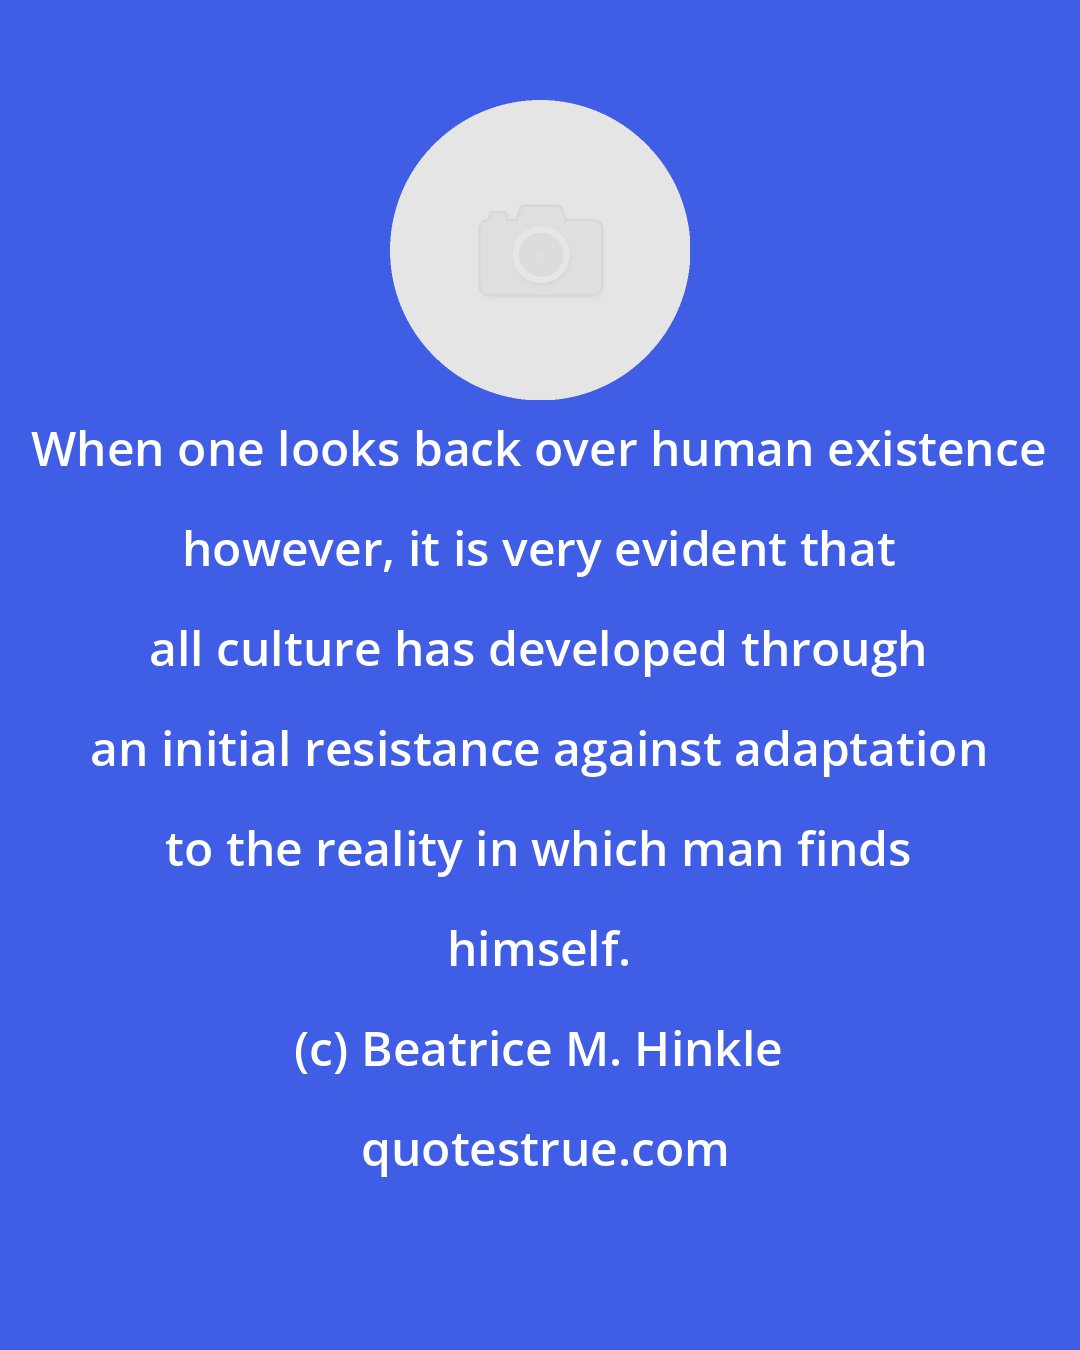 Beatrice M. Hinkle: When one looks back over human existence however, it is very evident that all culture has developed through an initial resistance against adaptation to the reality in which man finds himself.